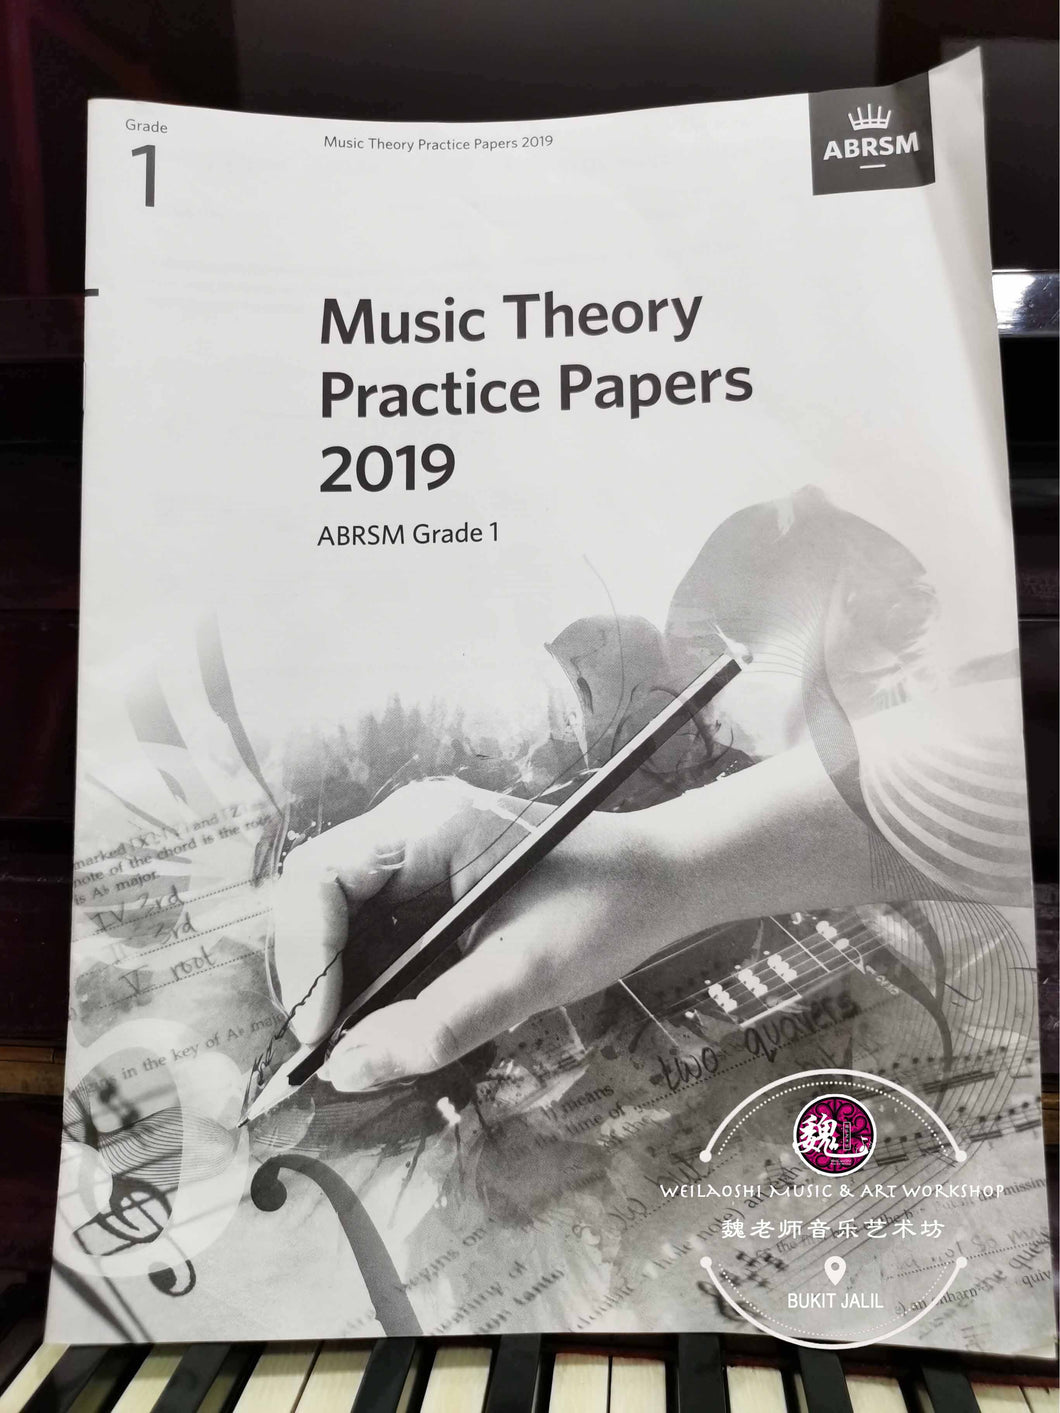 ABRSM Music Theory Practice Paper 2019 Grade 1